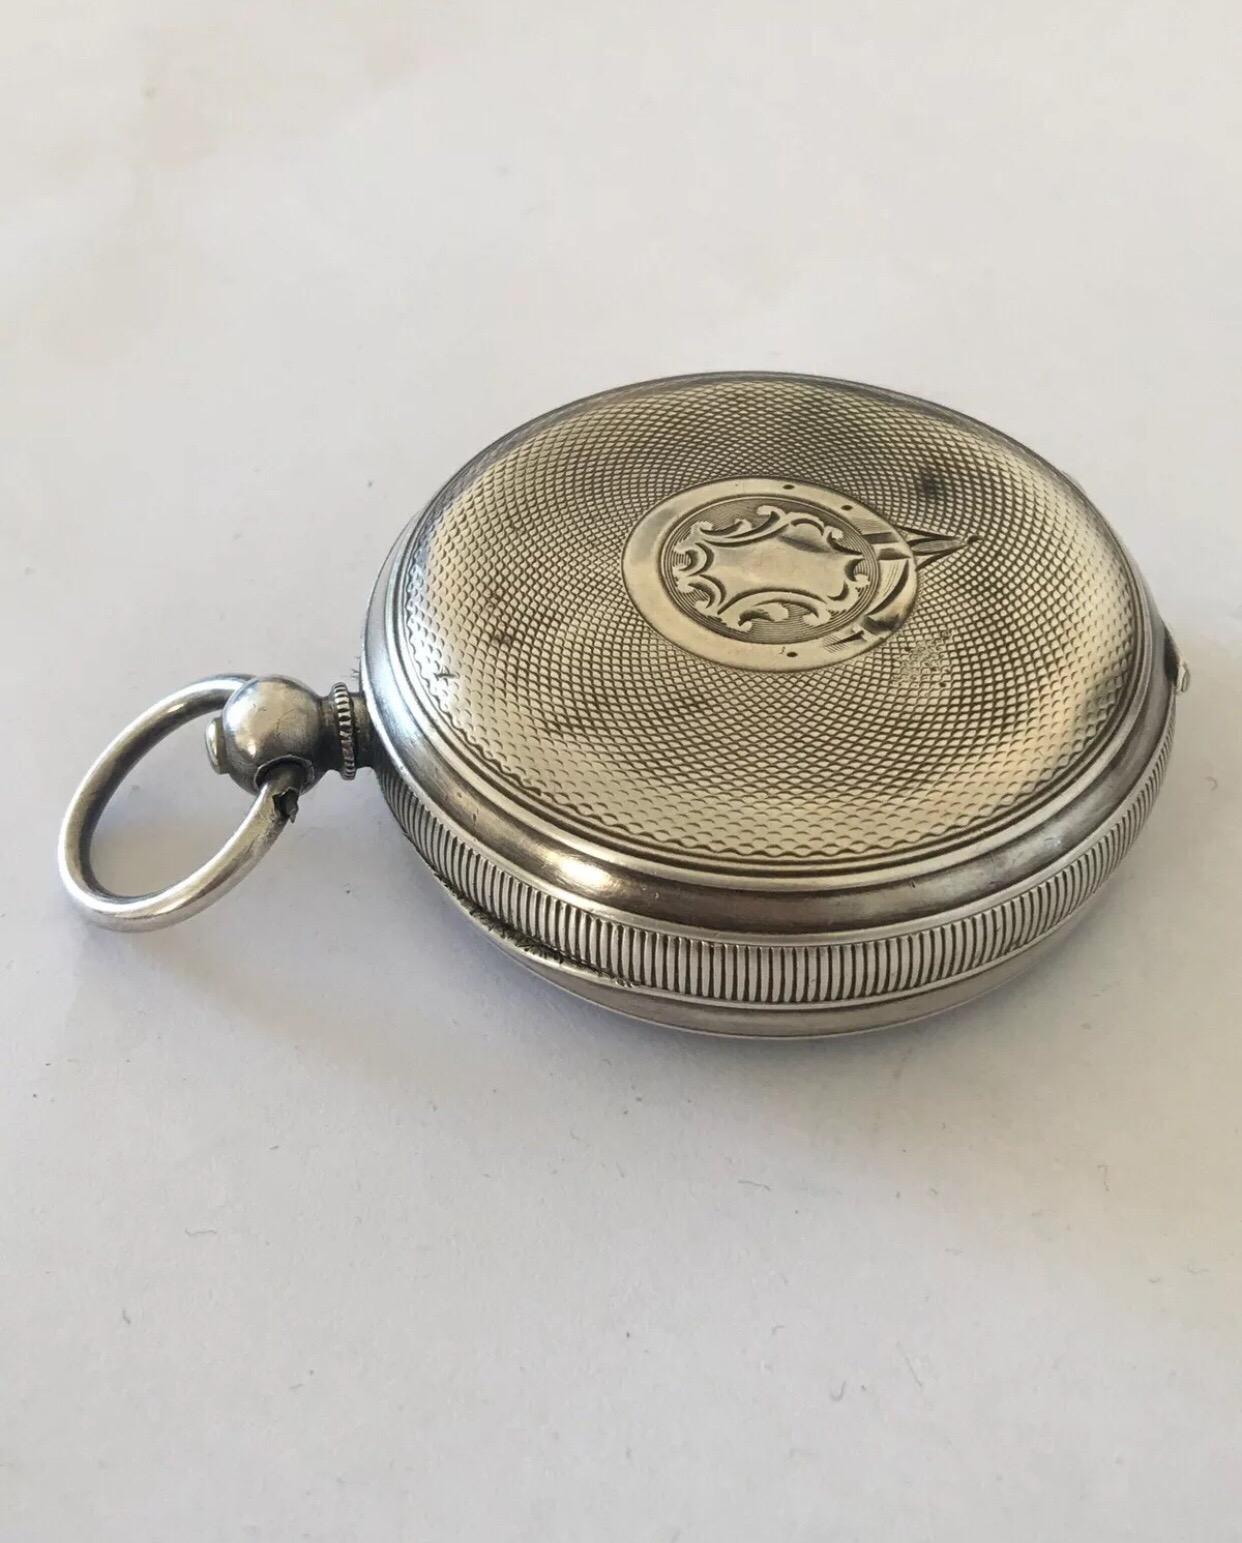 Antique Silver Swiss Made Pocket Watch Signed H. Samuel Manchester Acme Lever 2